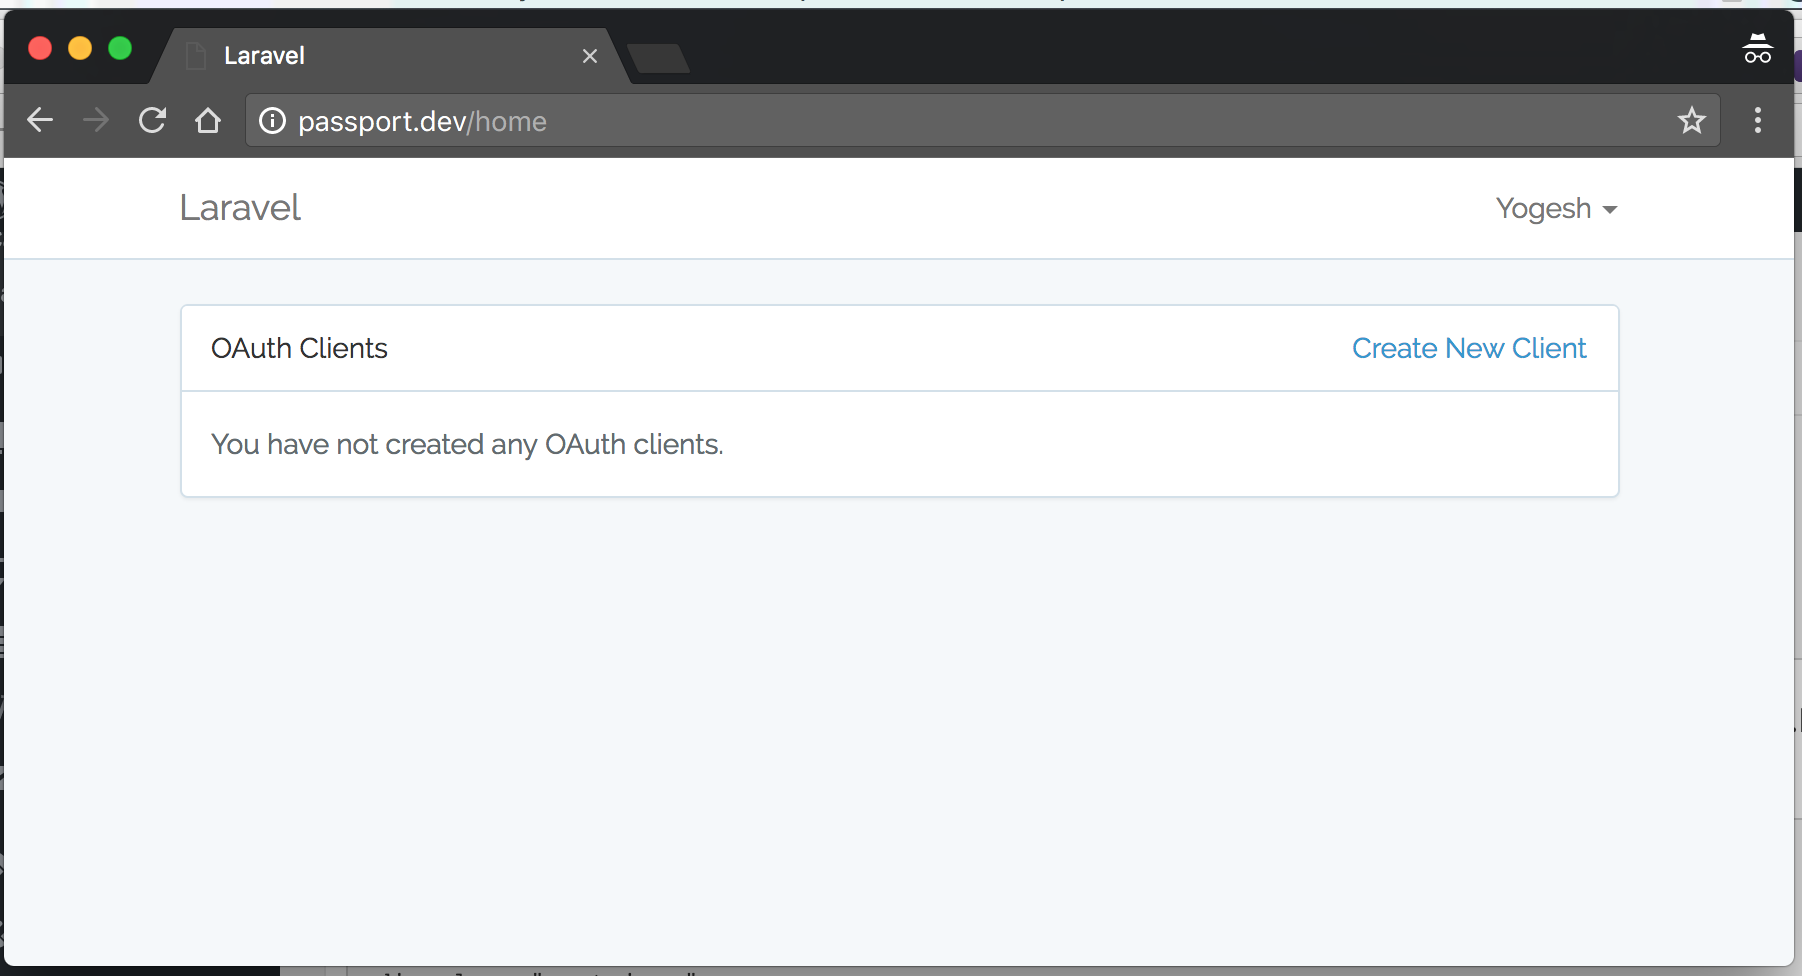 OAuth Clients Component loaded